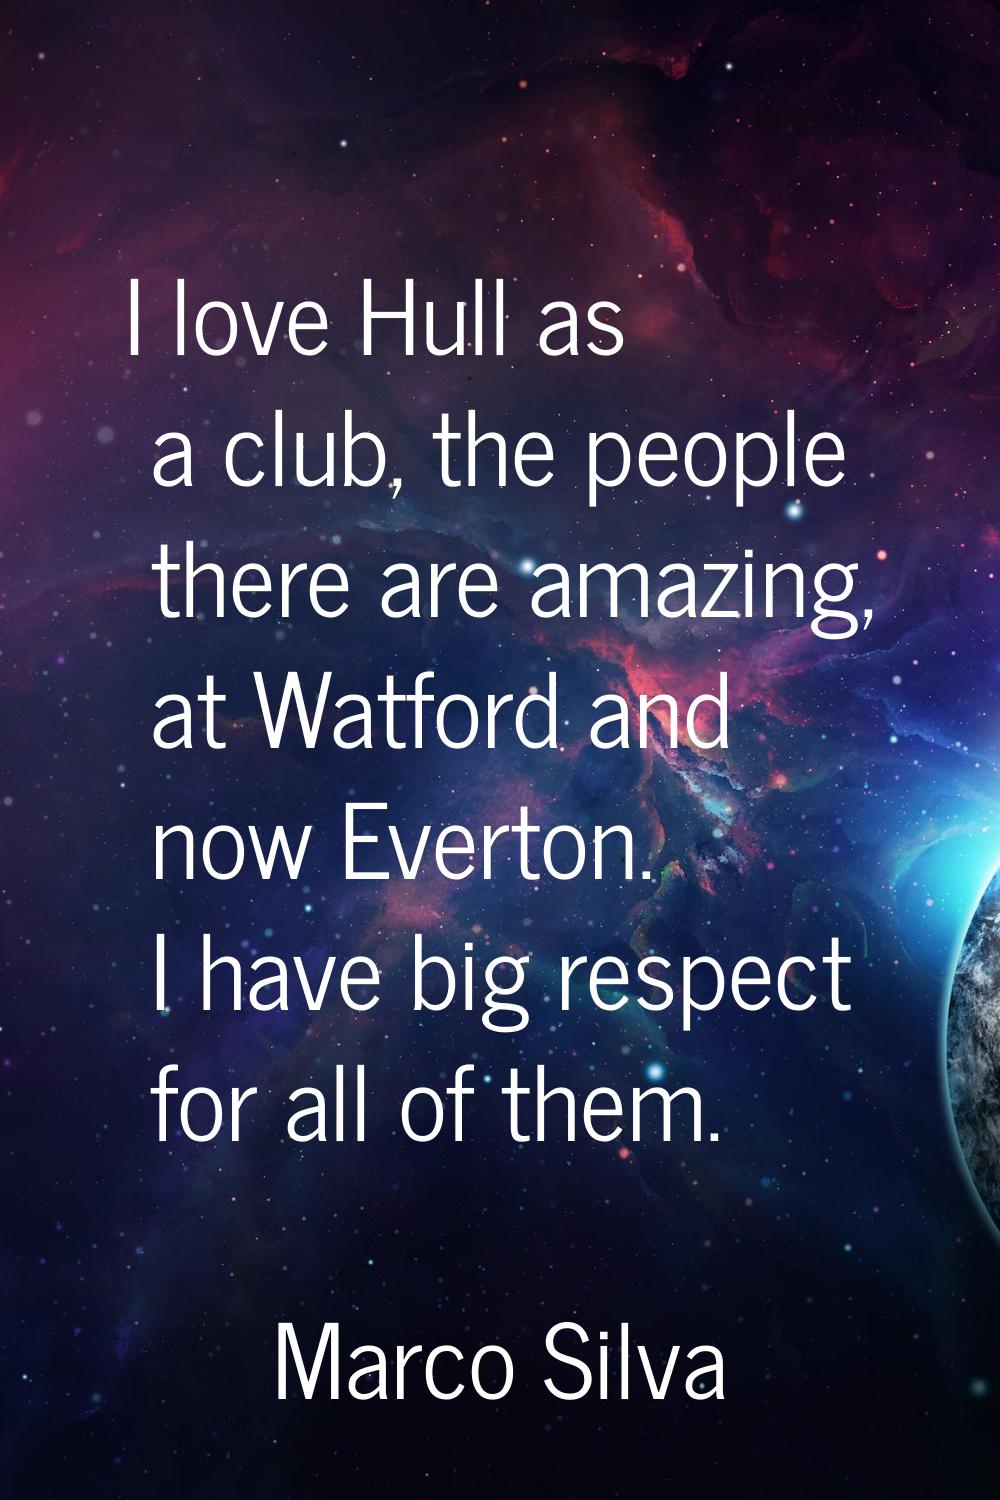 I love Hull as a club, the people there are amazing, at Watford and now Everton. I have big respect